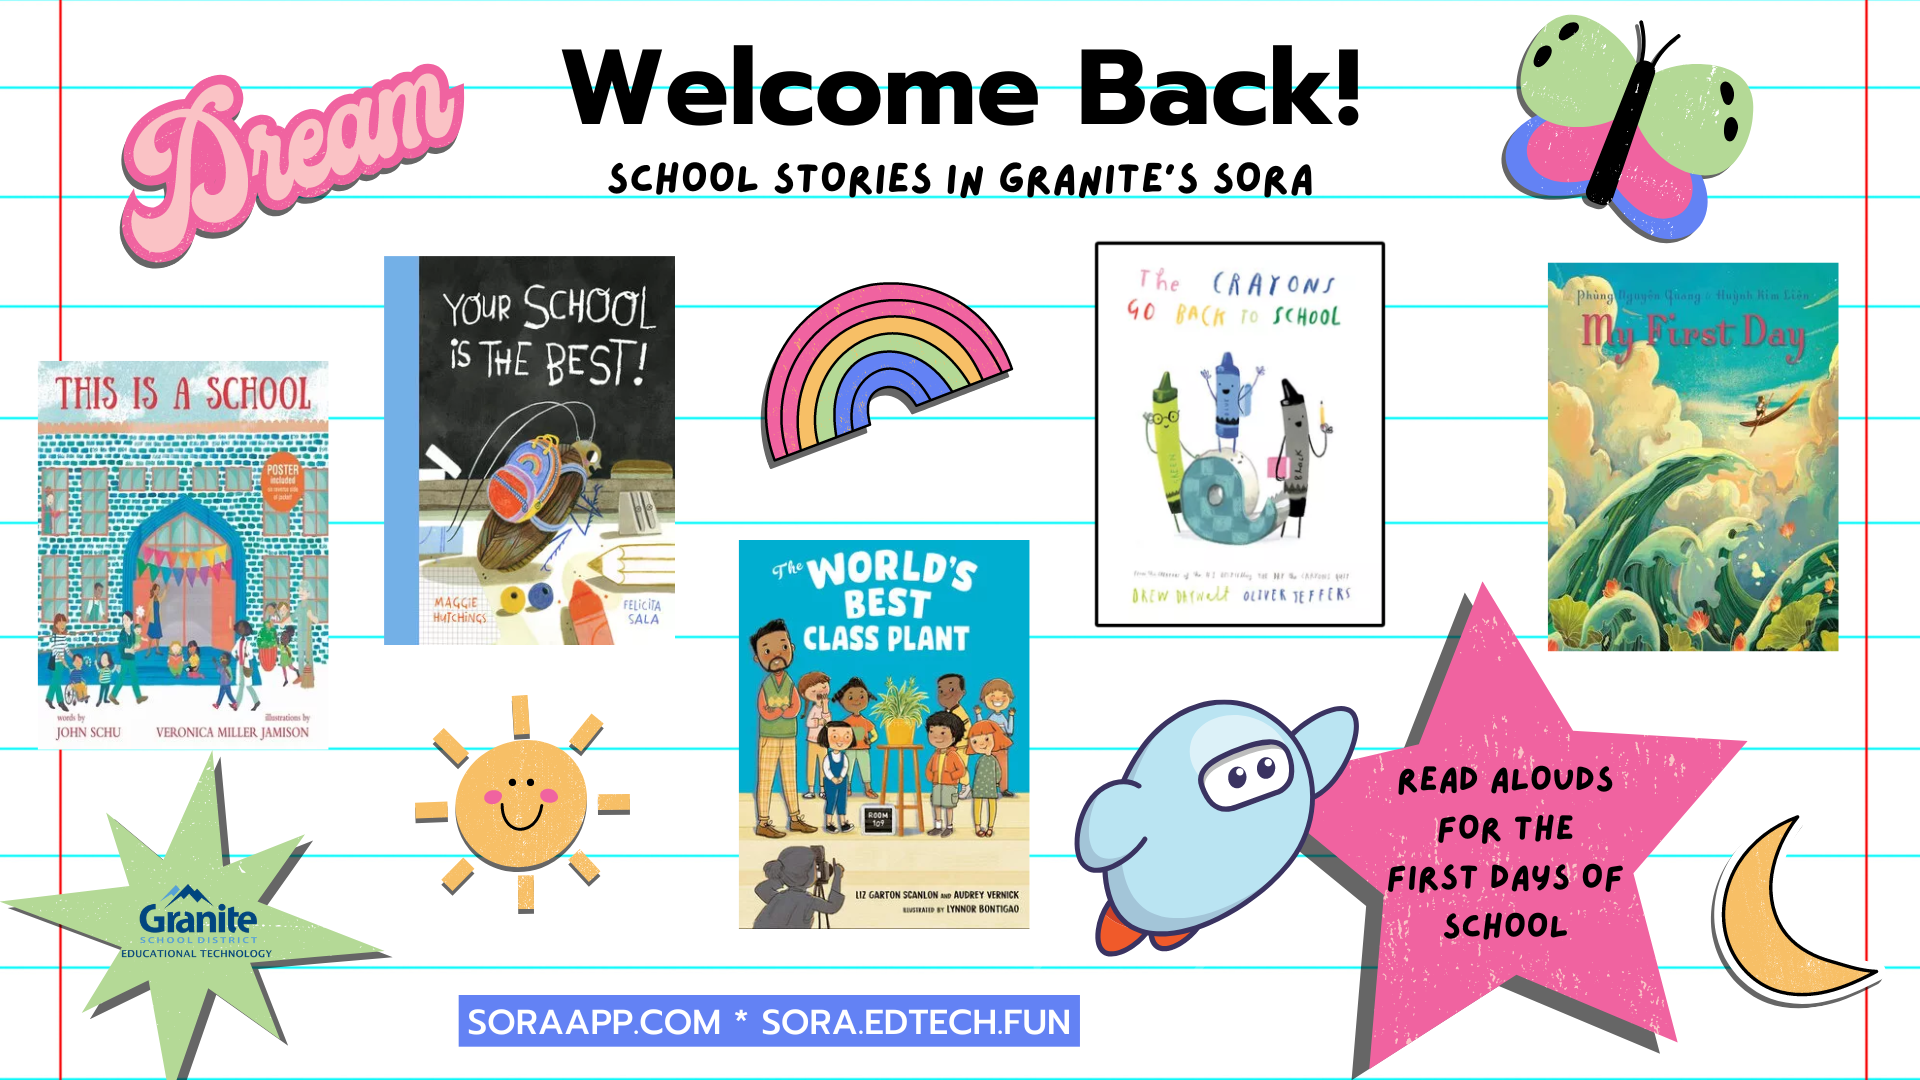 Cafegymatorium Lifestyle
School Stories
In Granite's Sora
soraapp.com * sora.edtech.fun
[Image in notebook page style with decorative stickers and cover images of recent-release back to school picture books]